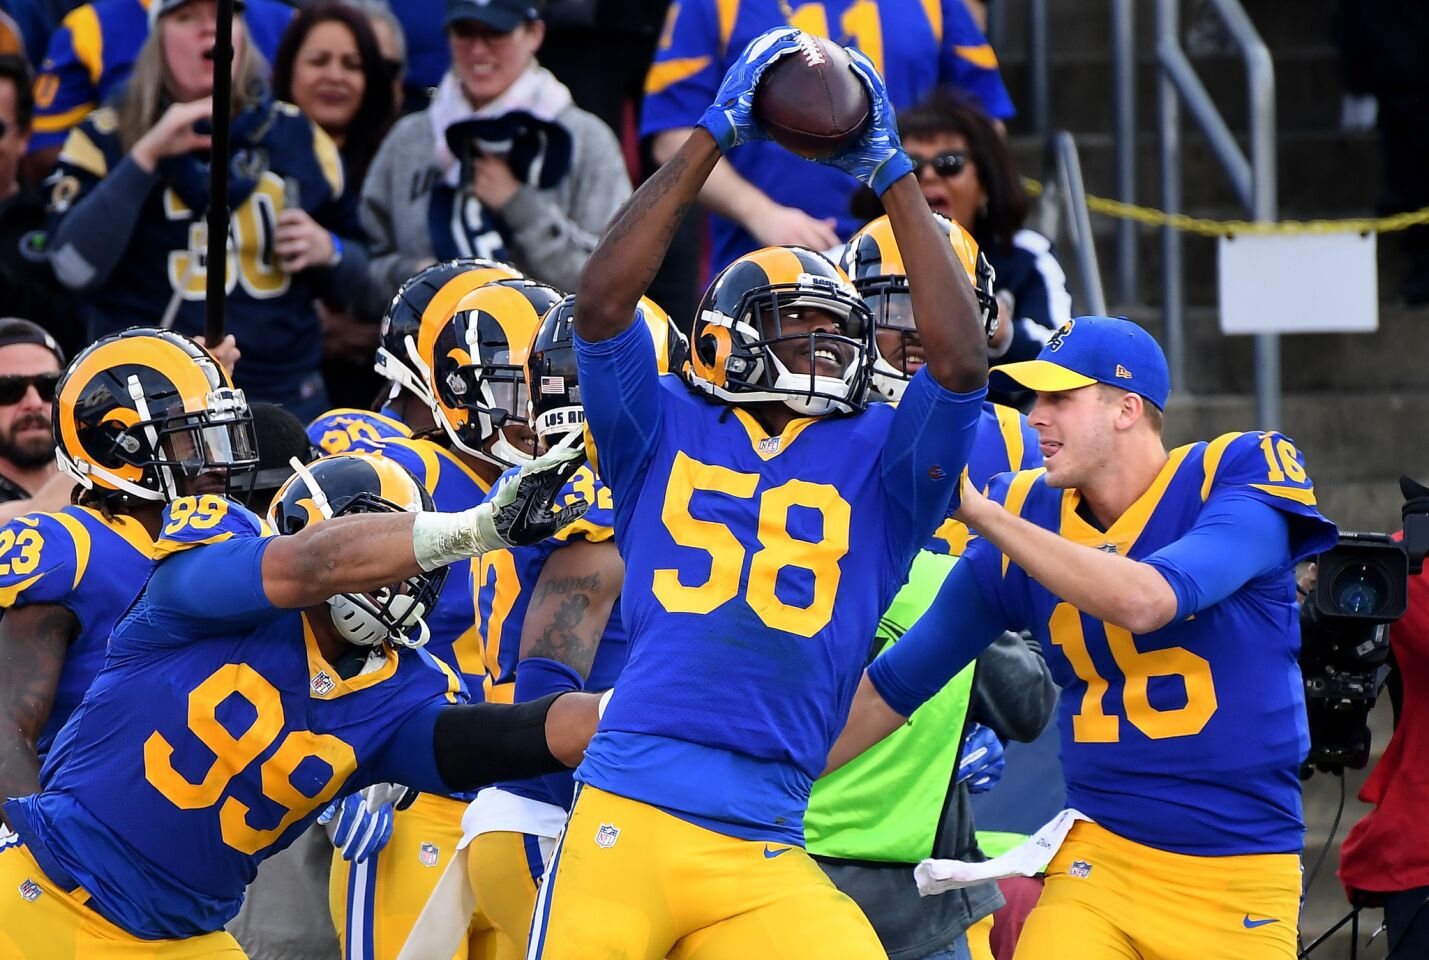 Rams linebacker Cory Littleton celebrates a touchdown with teamates after intercepting a pass against the 49ers.